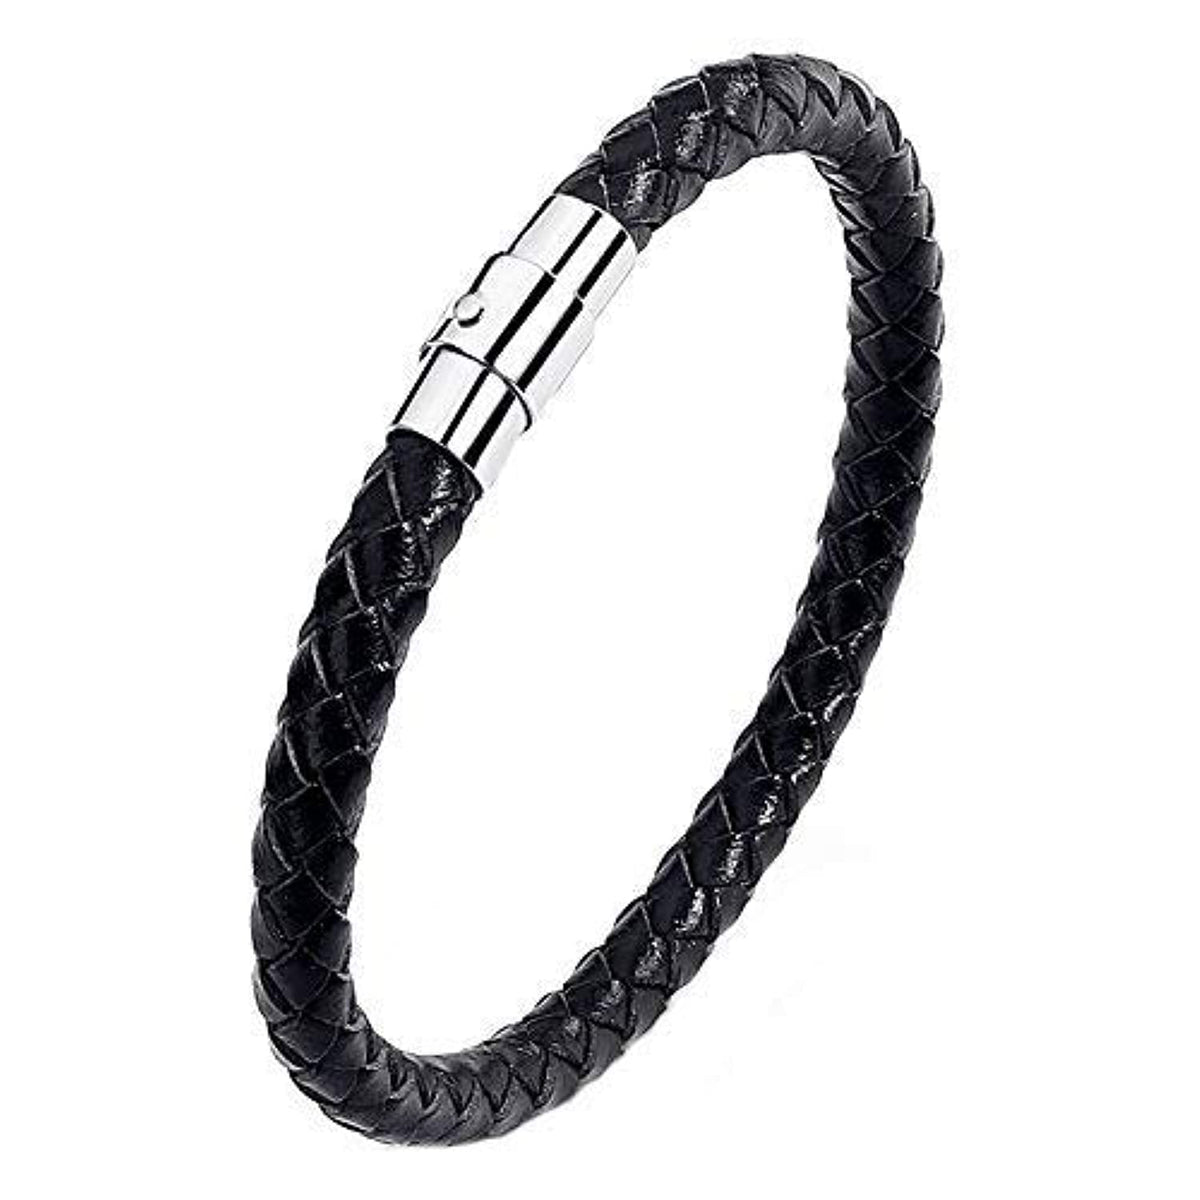 Yellow Chimes Leather Bracelet for Men Handcrafted Braided Black Leather Wrist Band Bracelet for Men and Boys